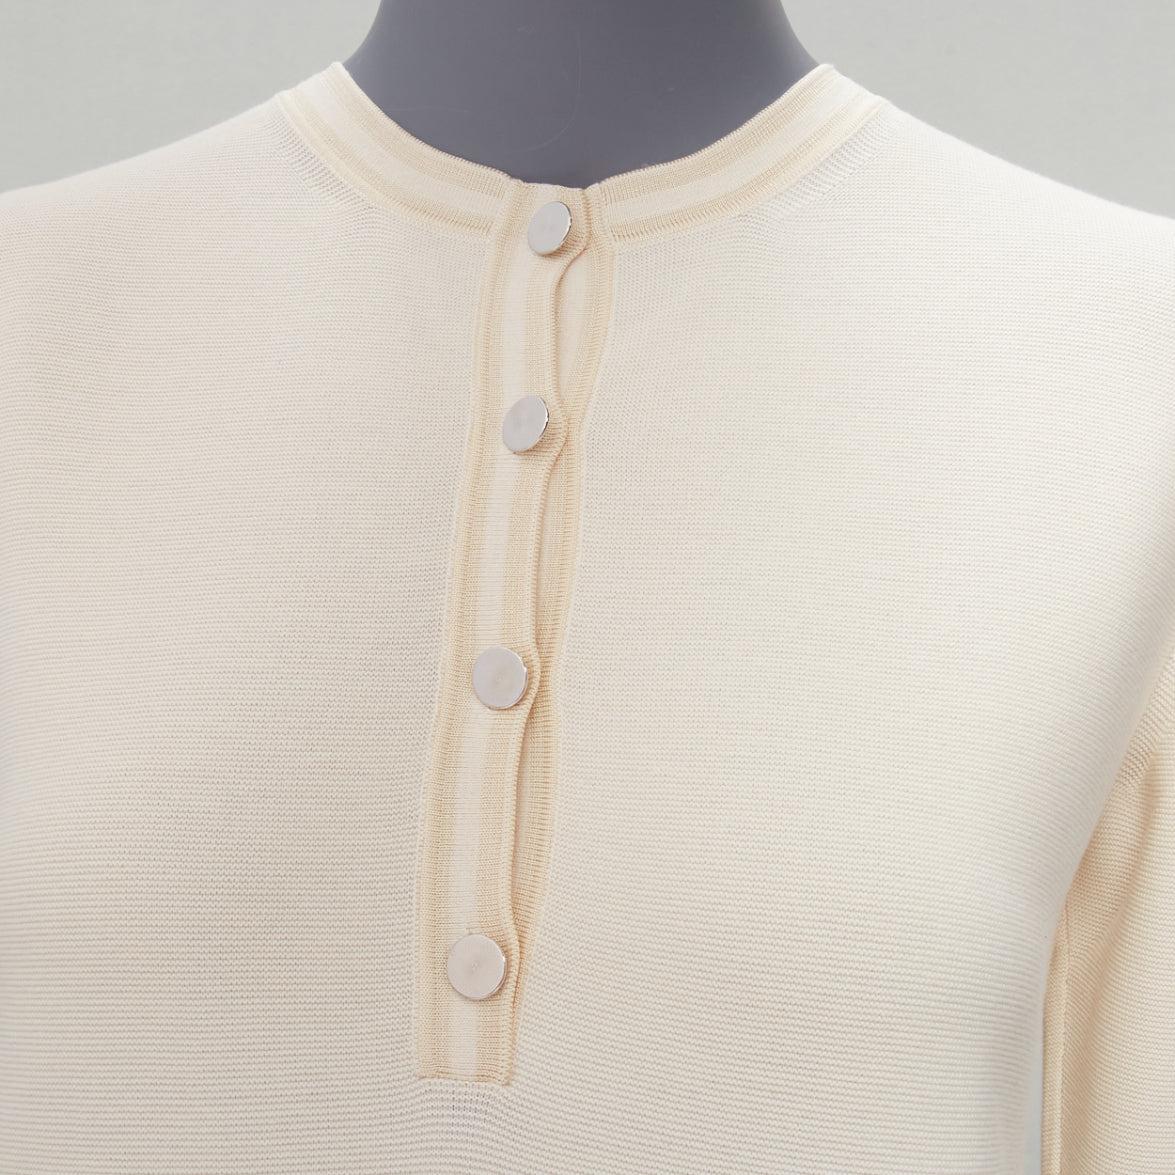 HERMES ivory cotton cashmere H logo buttons knitted polo shirt FR34 XS
Reference: SNKO/A00234
Brand: Hermes
Material: Cotton, Cashmere
Color: Cream
Pattern: Solid
Closure: Button
Extra Details: H logo buttons.
Made in: Italy

CONDITION:
Condition: